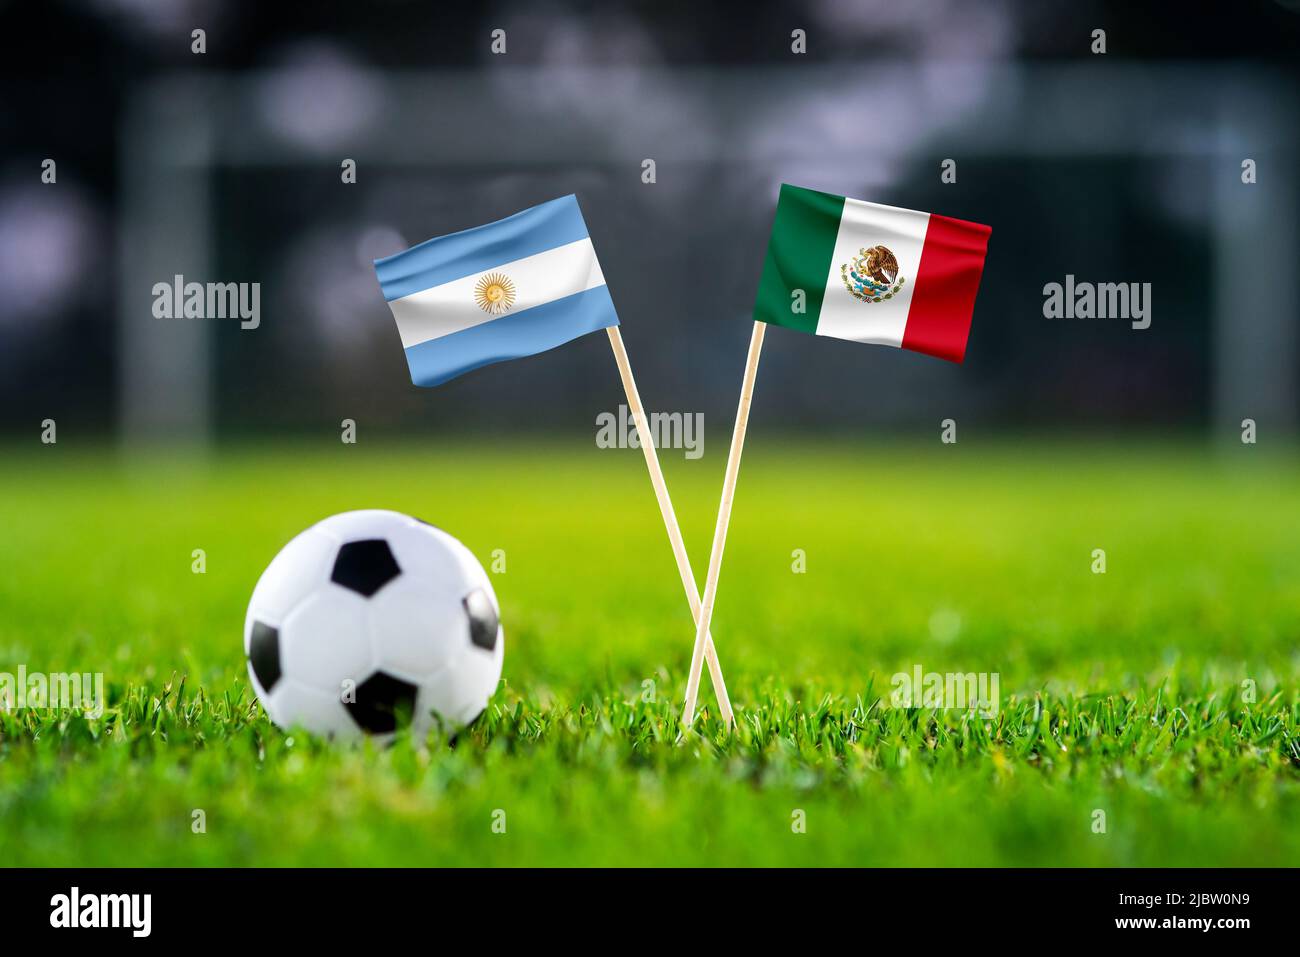 Argentina vs mexico lusail football match wallpaper handmade national flags and soccer ball on green grass football stadium in background black stock photo